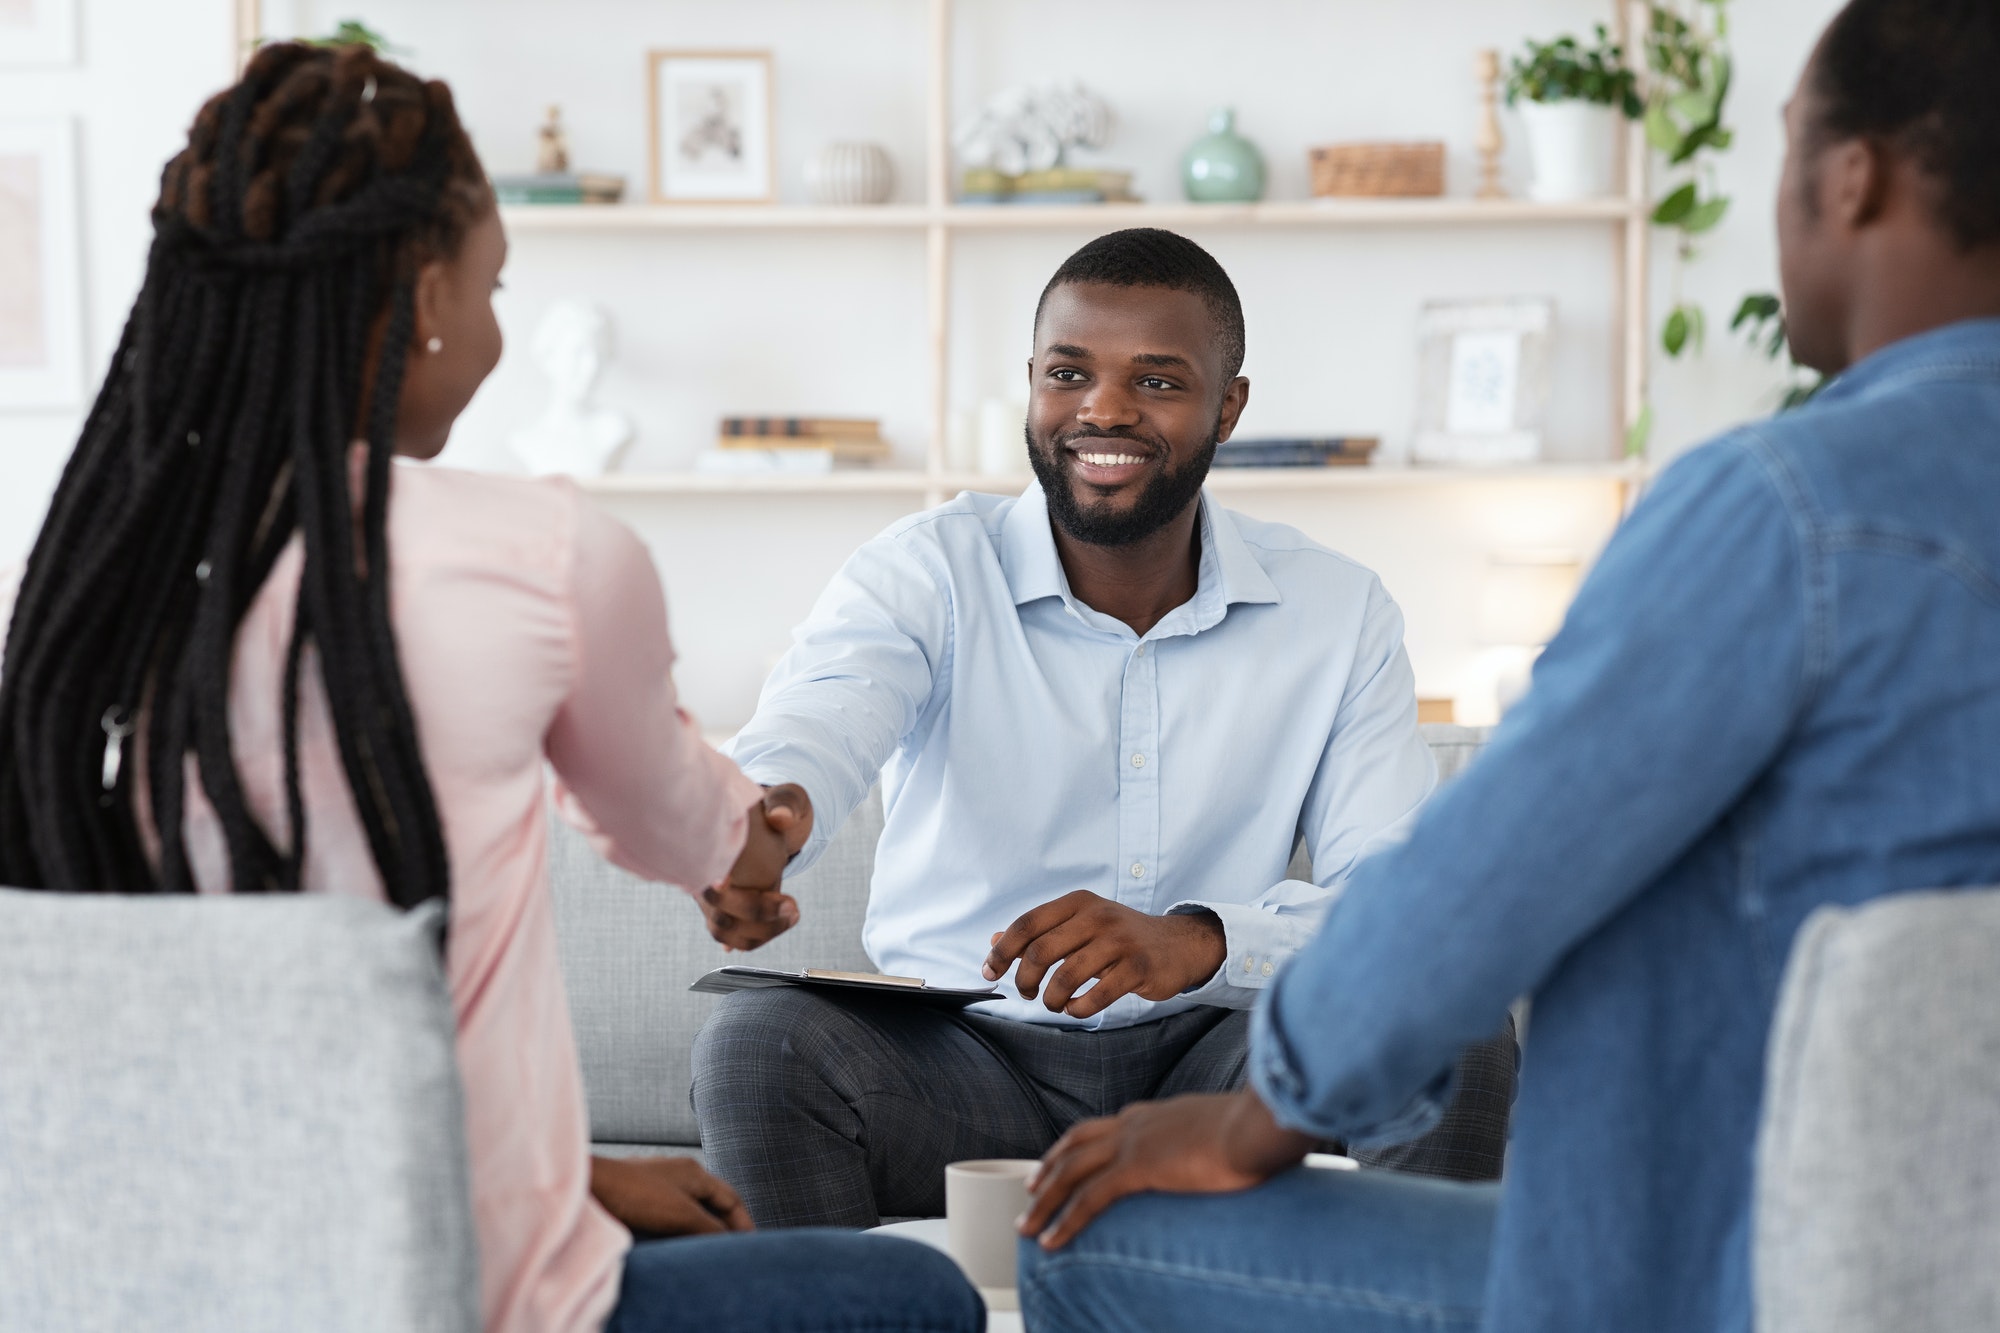 Family Counselor Shaking Hands With Happy Black Couple After Successful Therapy